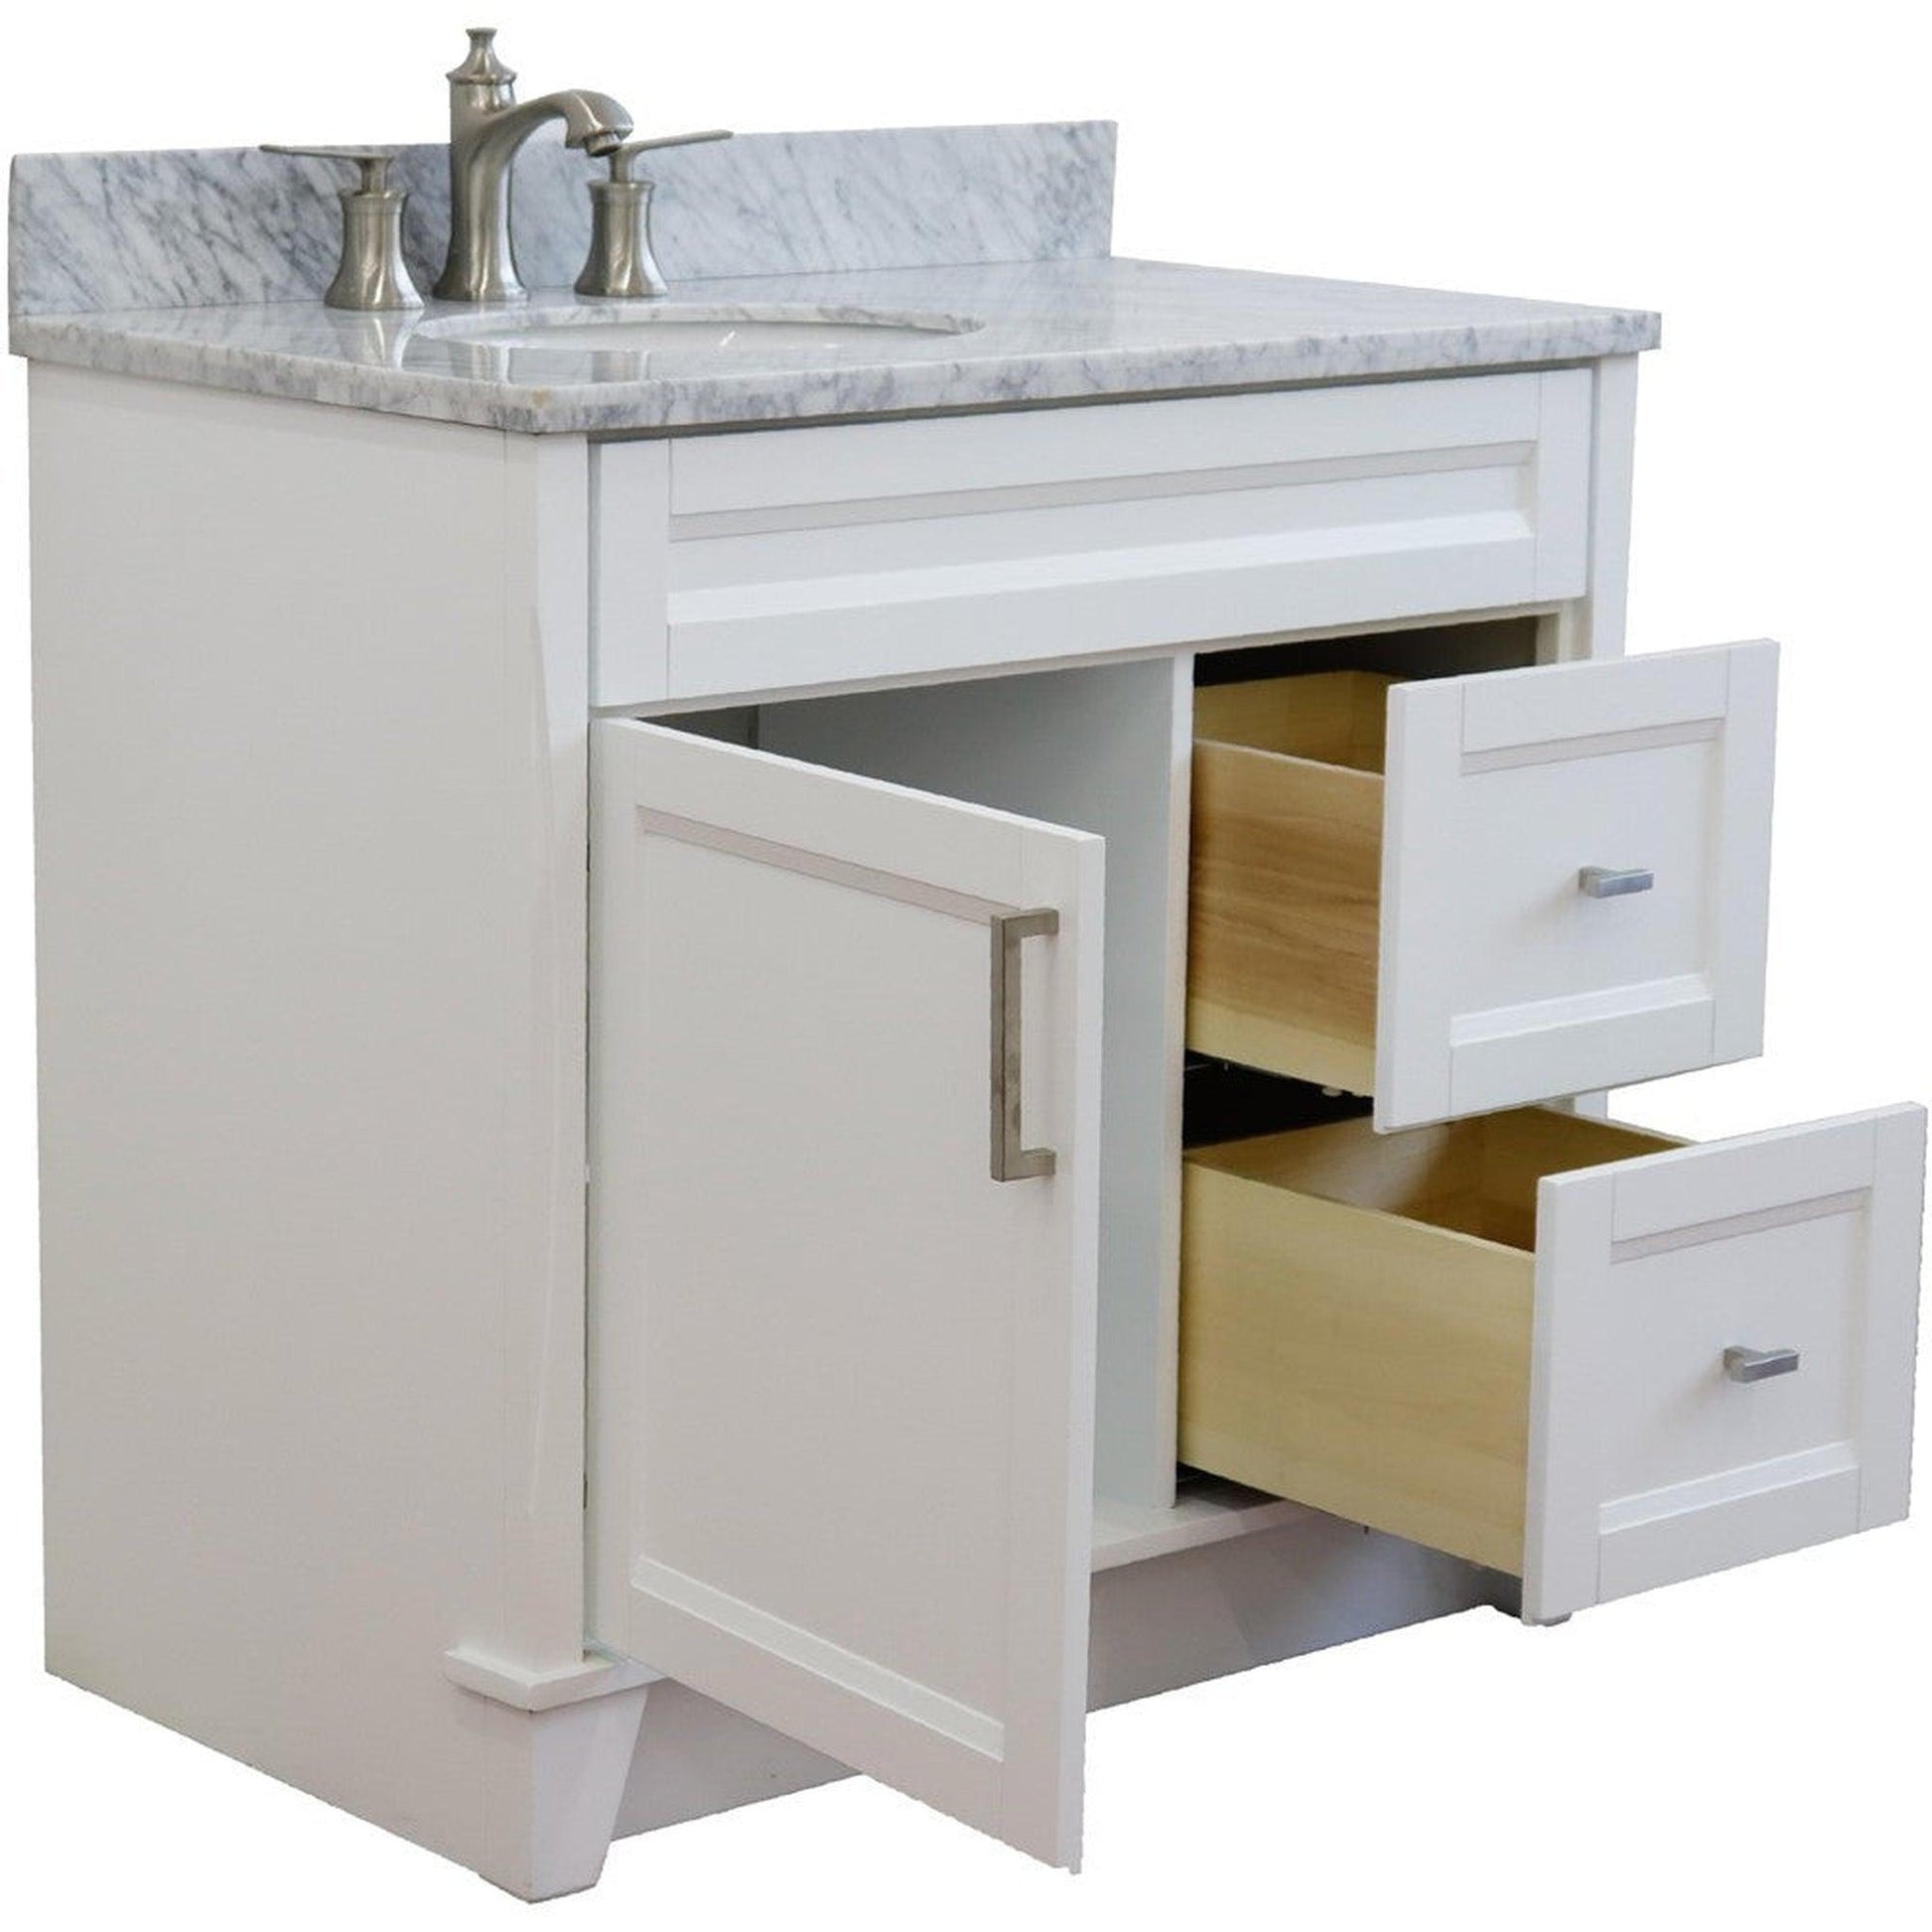 Bellaterra Home Terni 37" 1-Door 2-Drawer White Freestanding Vanity Set With Ceramic Left Offset Undermount Oval Sink and White Carrara Marble Top, and Left Door Base